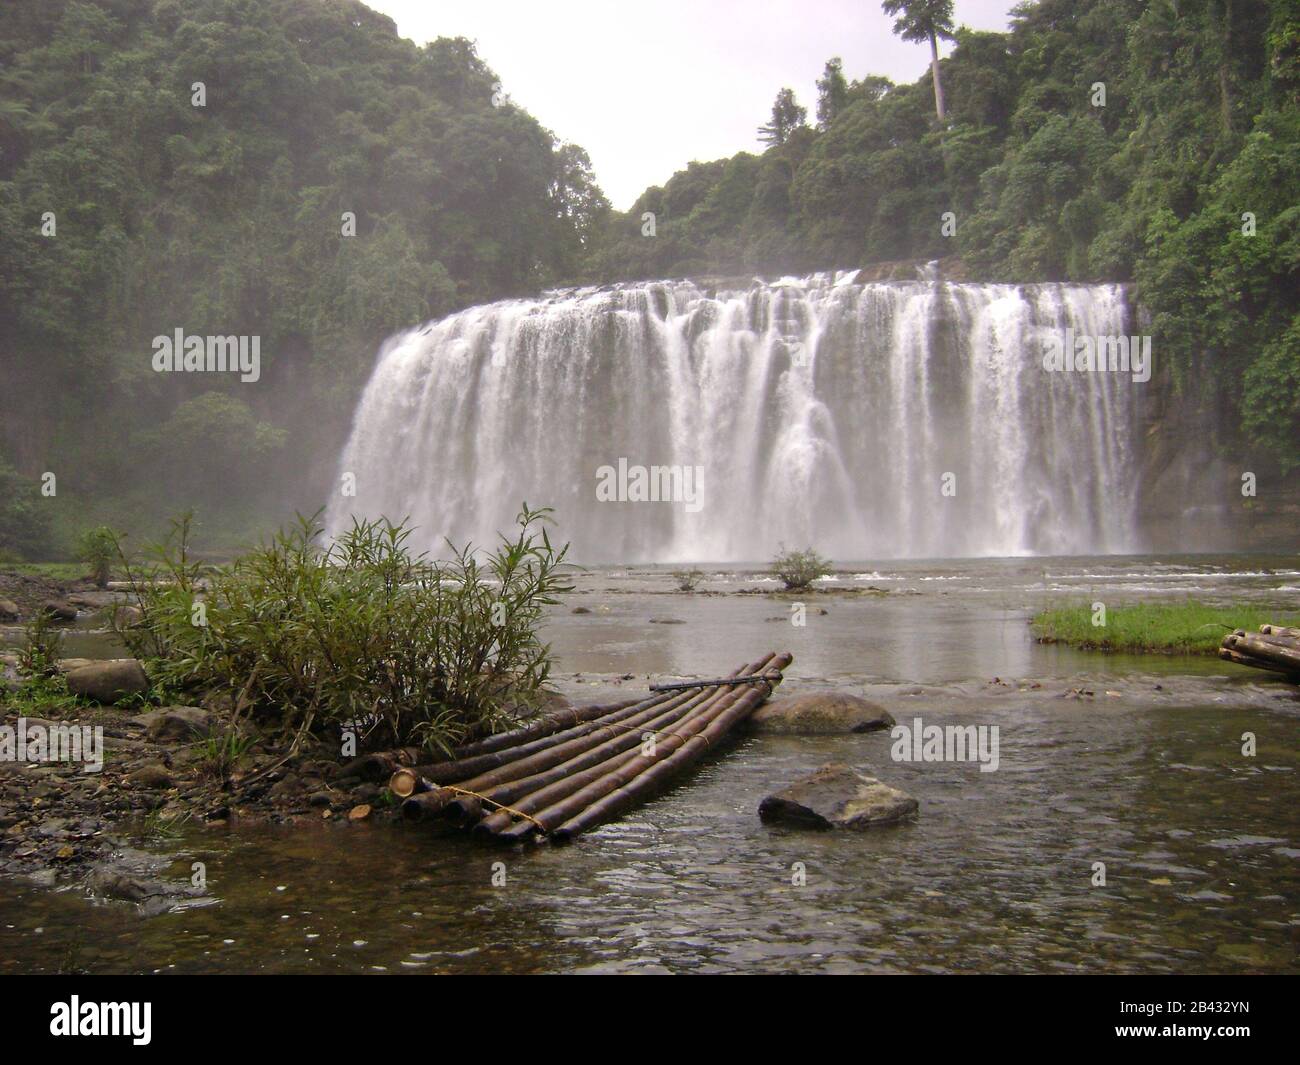 Tinuy-an Falls  with a bamboo raft in the water. Tinuy-an Falls is in Surigao del Sur, Philippines. Stock Photo